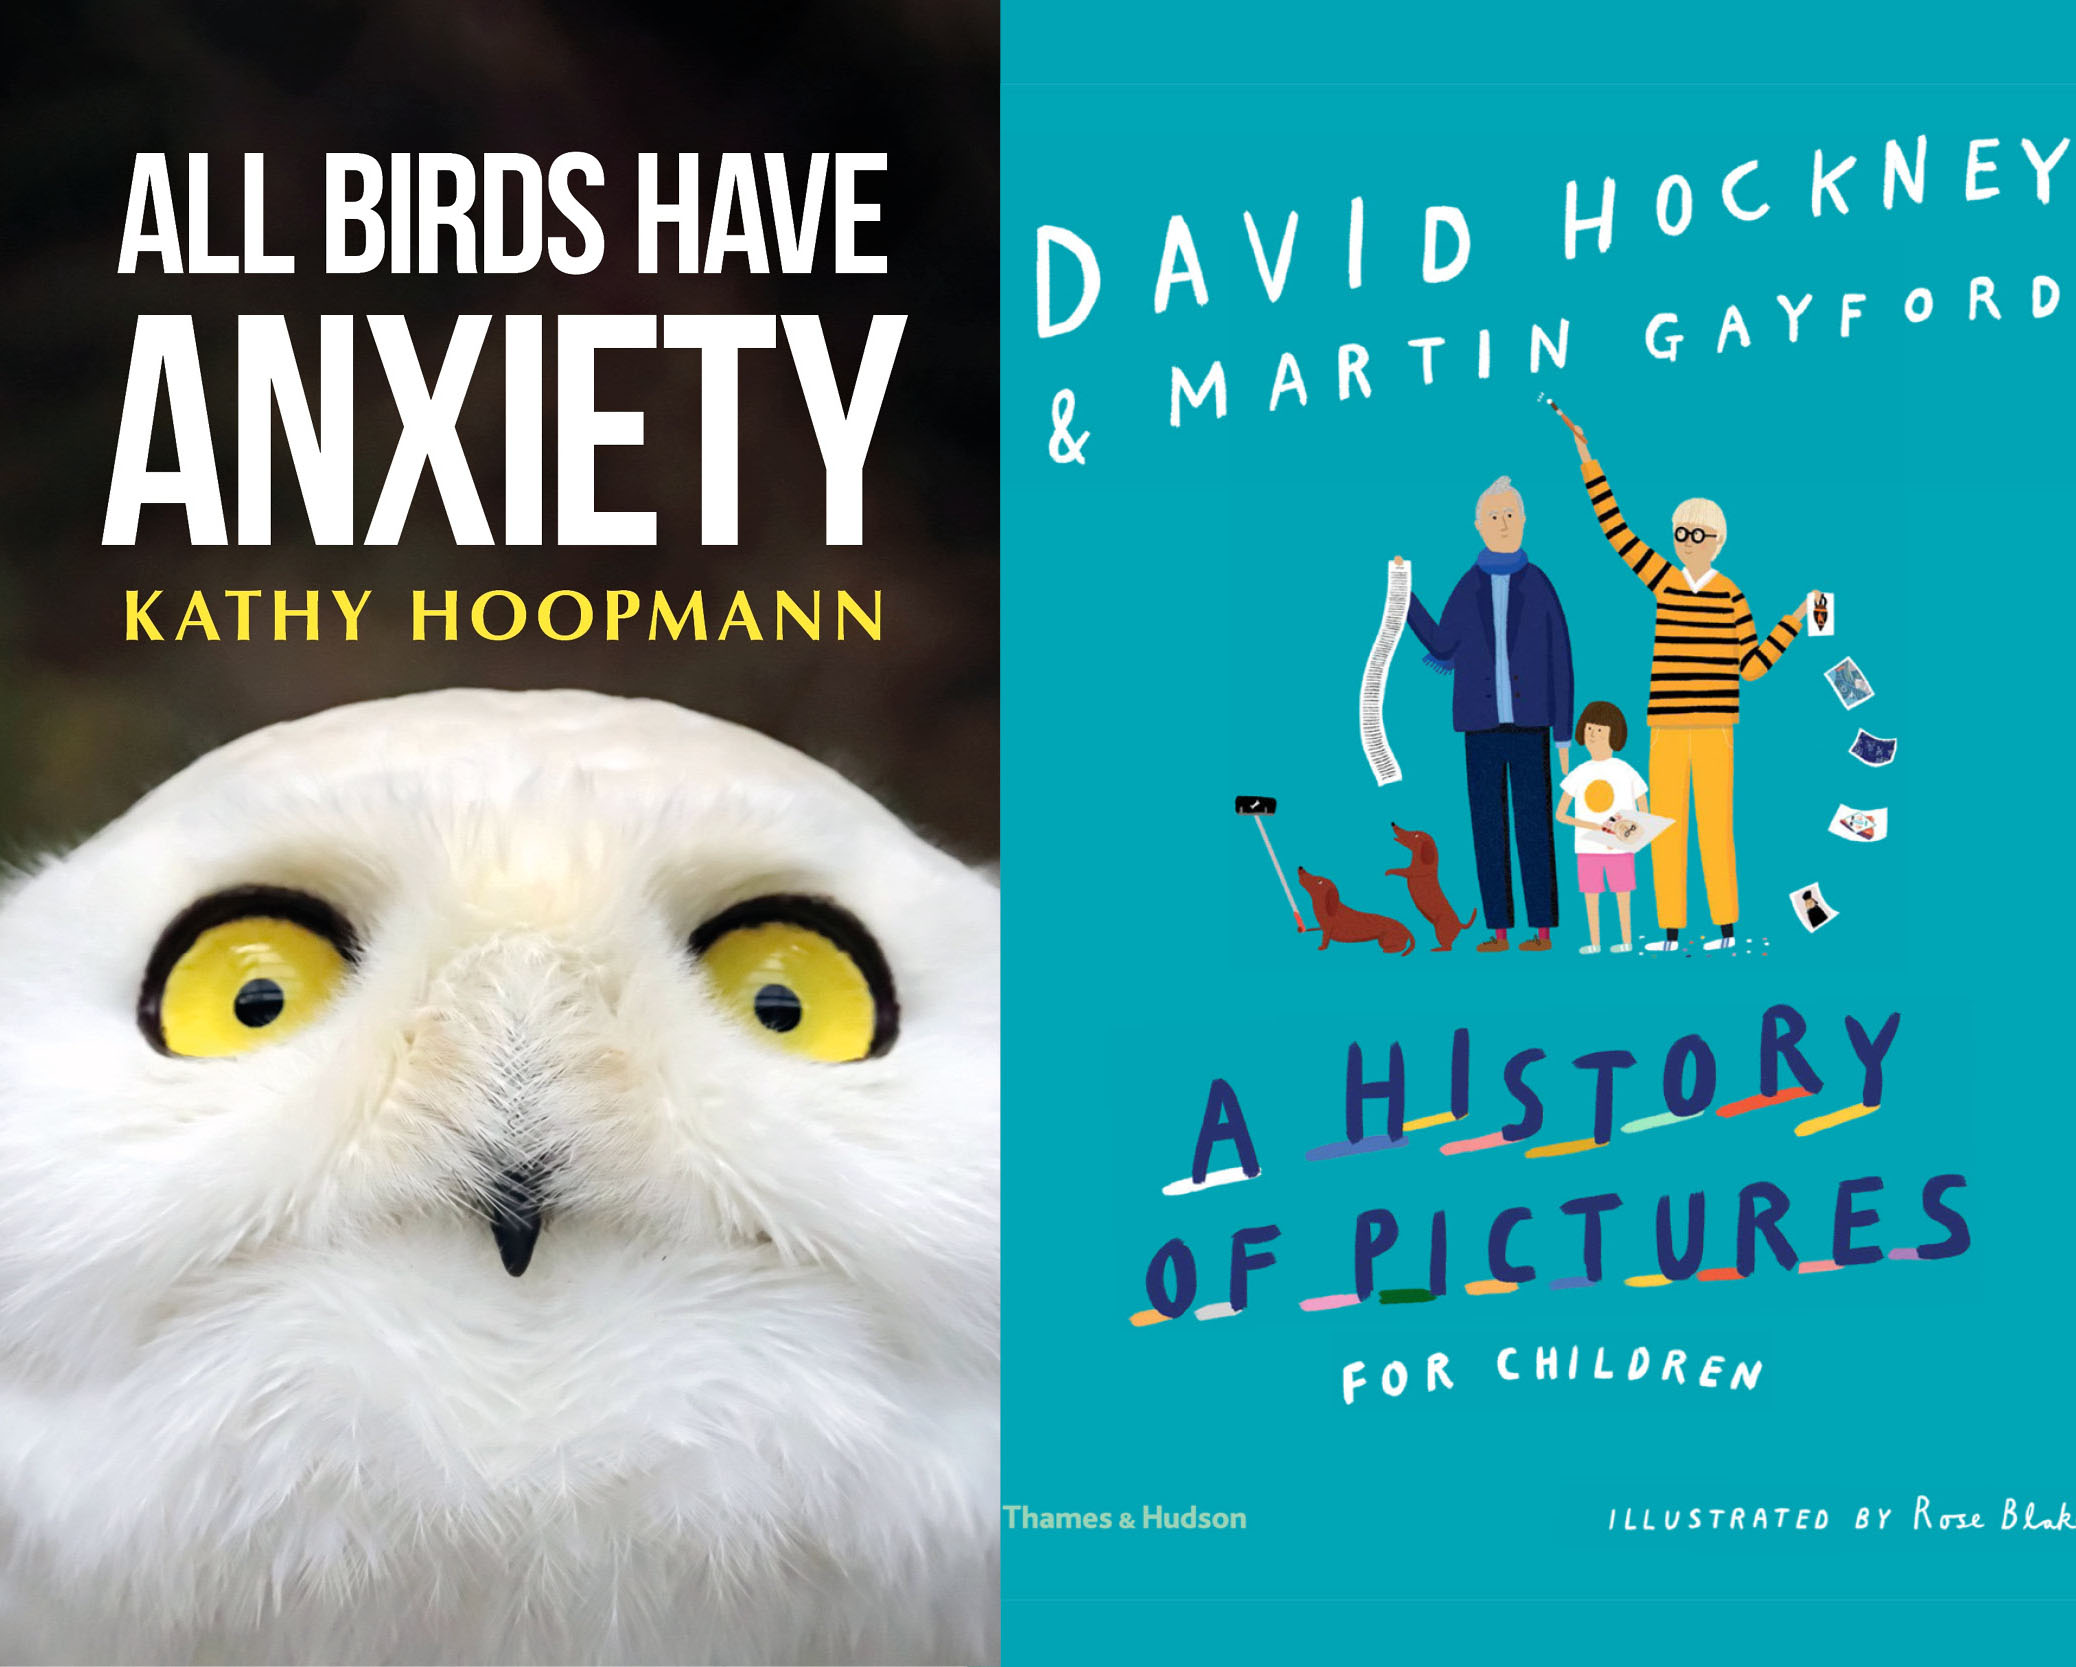 From Art to Anxiety: the 2019 ALCS Educational Writers’ Award shortlist